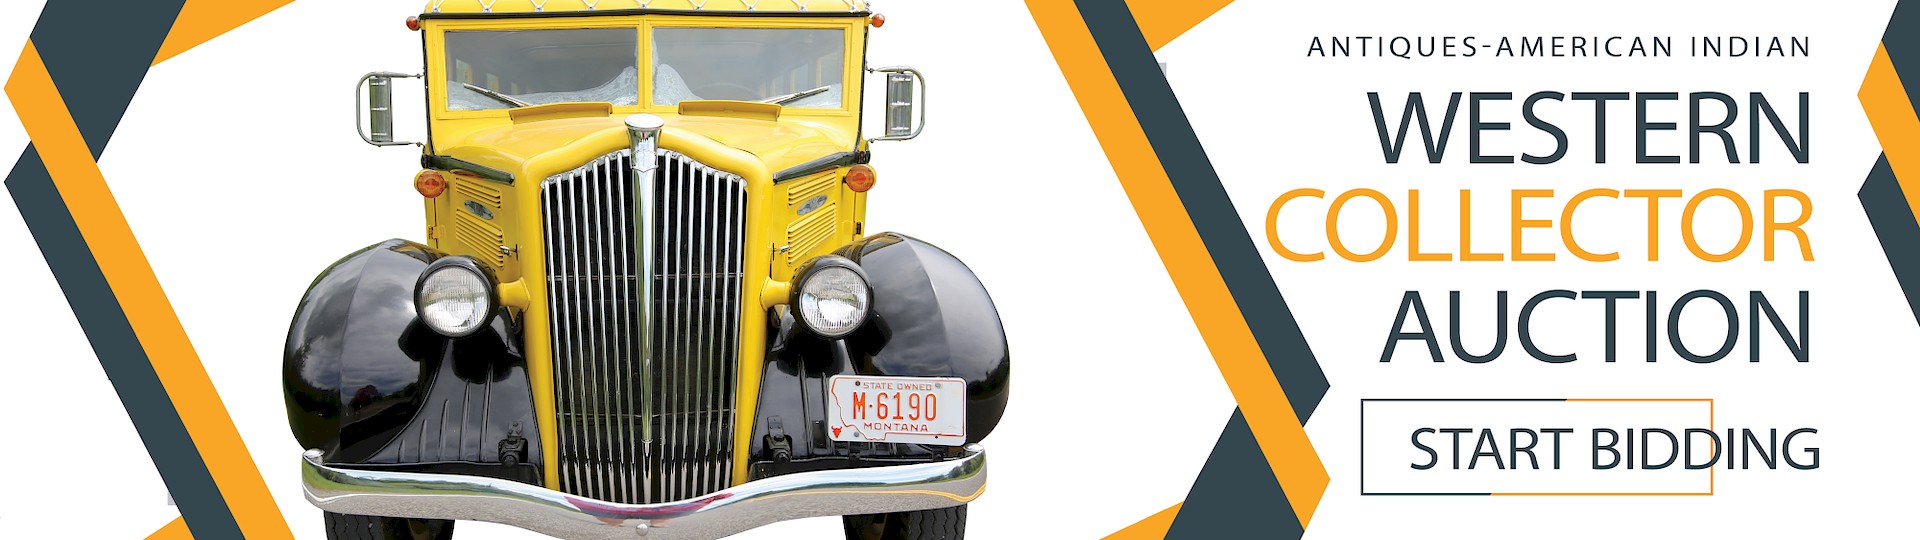 American Indian & Western Frontier Auction: Yellowstone Bus by North American Auction Company